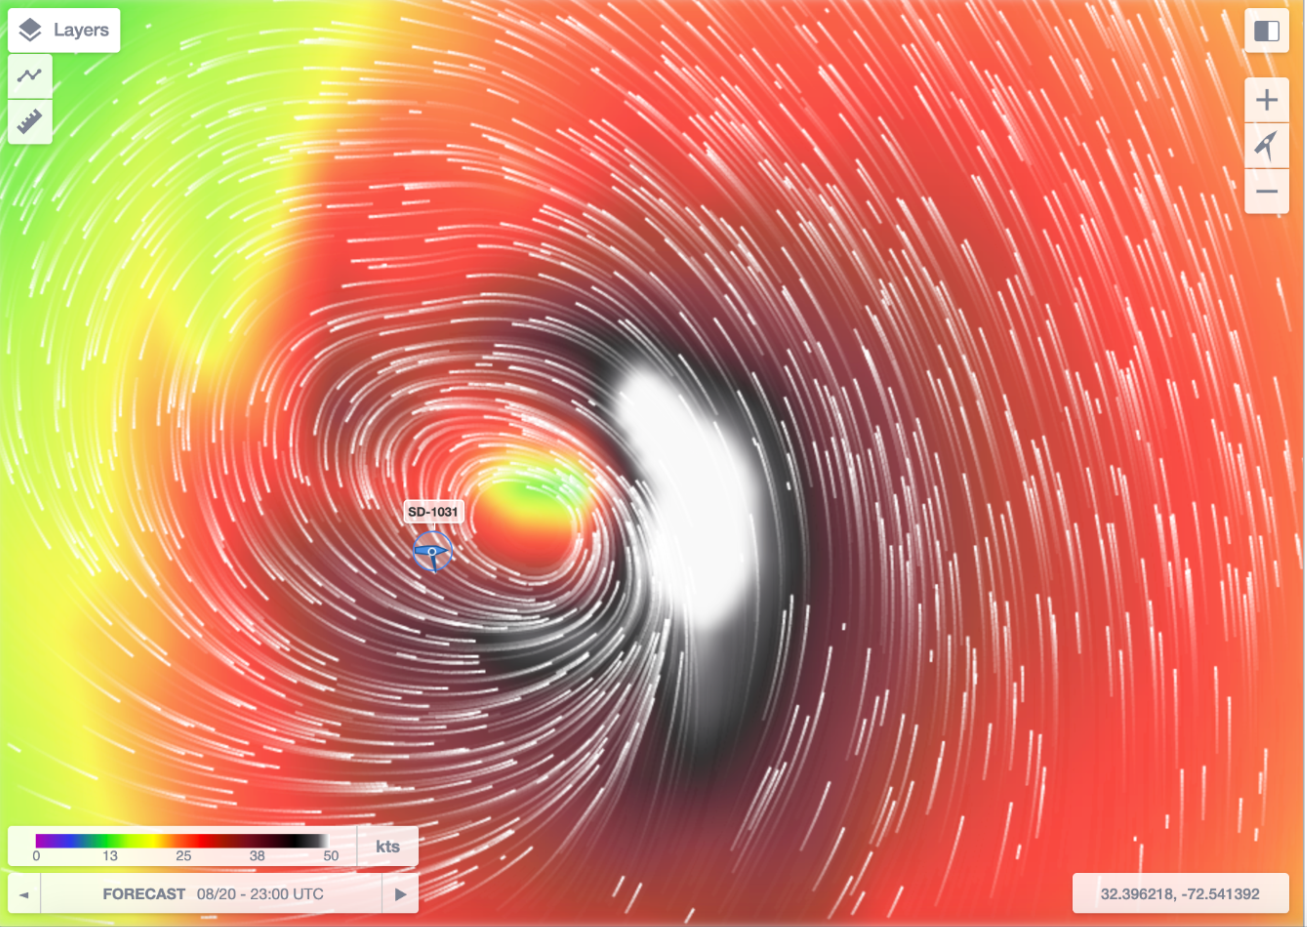 The position of  SD-1031 relative to Tropical Storm Henri. The white lines illustrate wind direction and the color is wind speed, which exceeds 50 knots east of the storm’s center. The data from the saildrone will be used to advance understanding tropical cyclone ocean-atmosphere interaction with the goal of improving intensity forecasts.